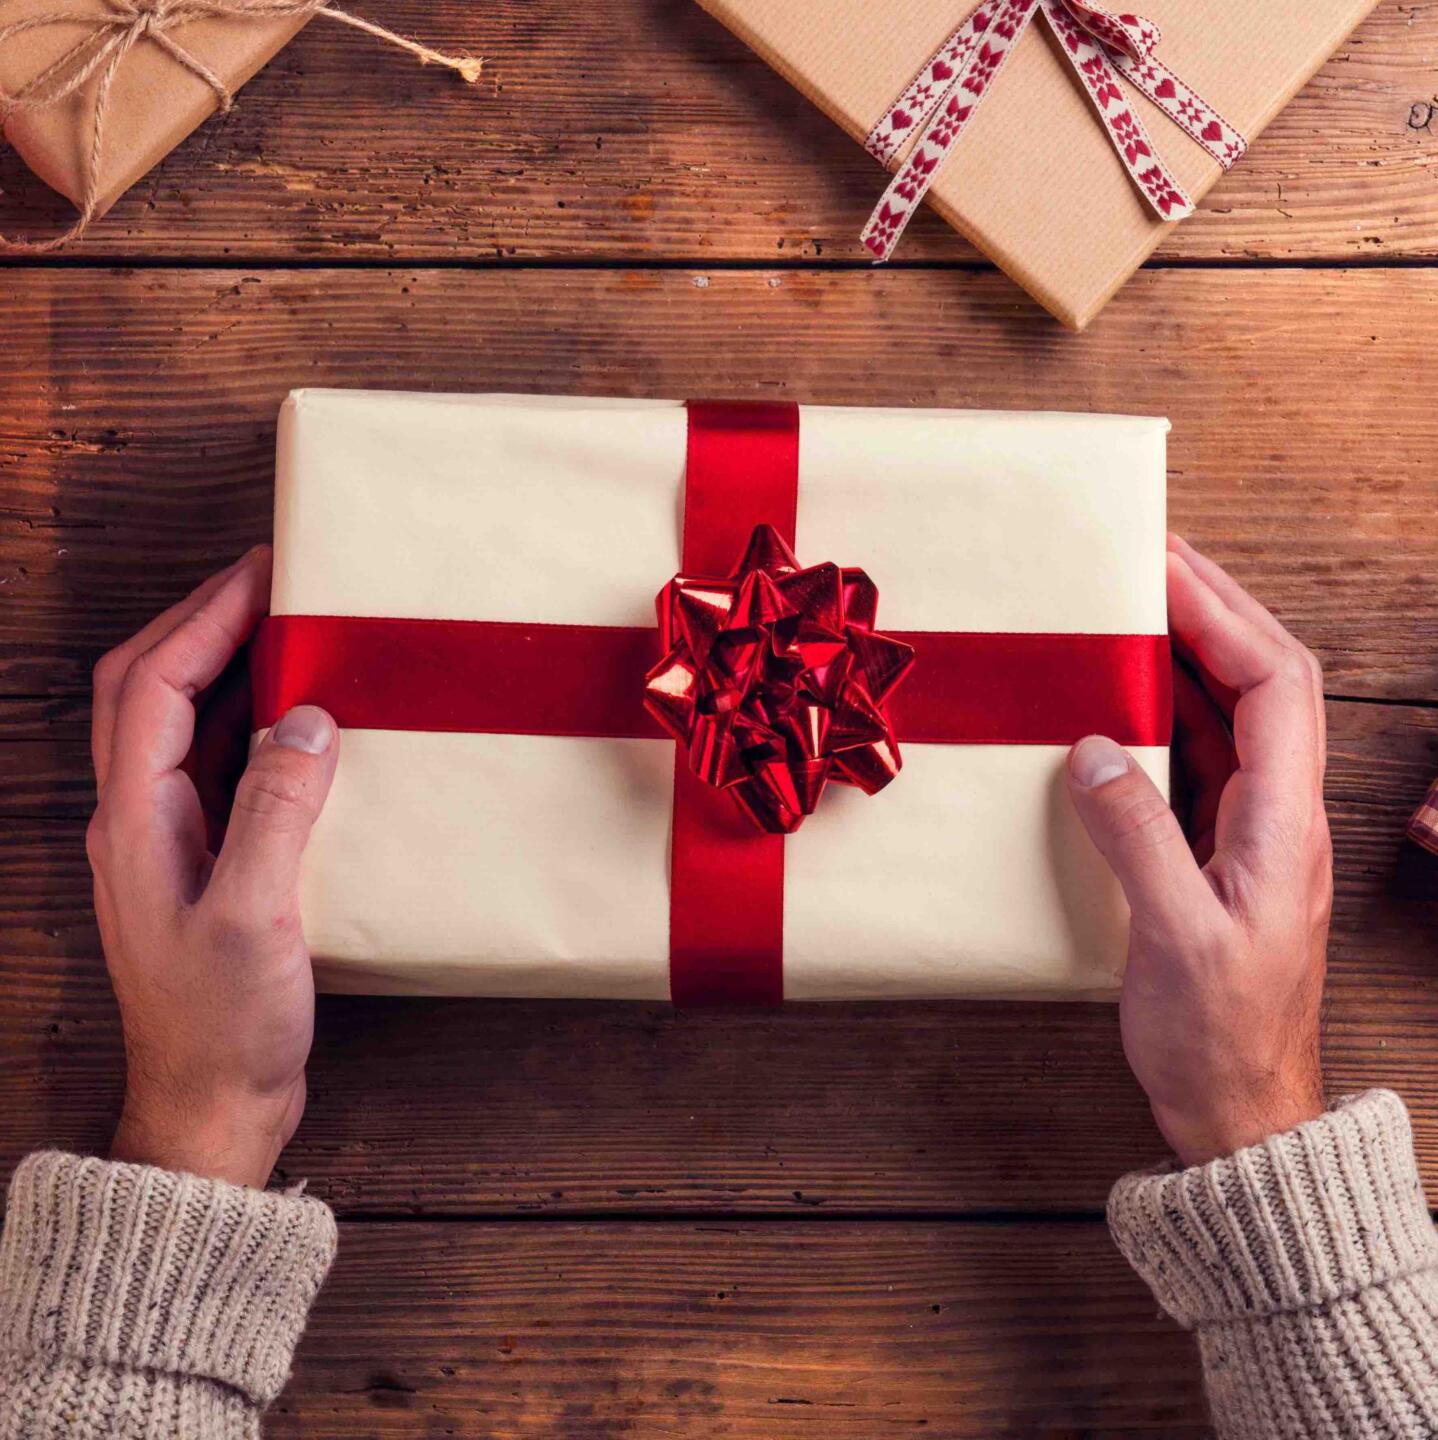 The Ultimate Gift – For Yourself